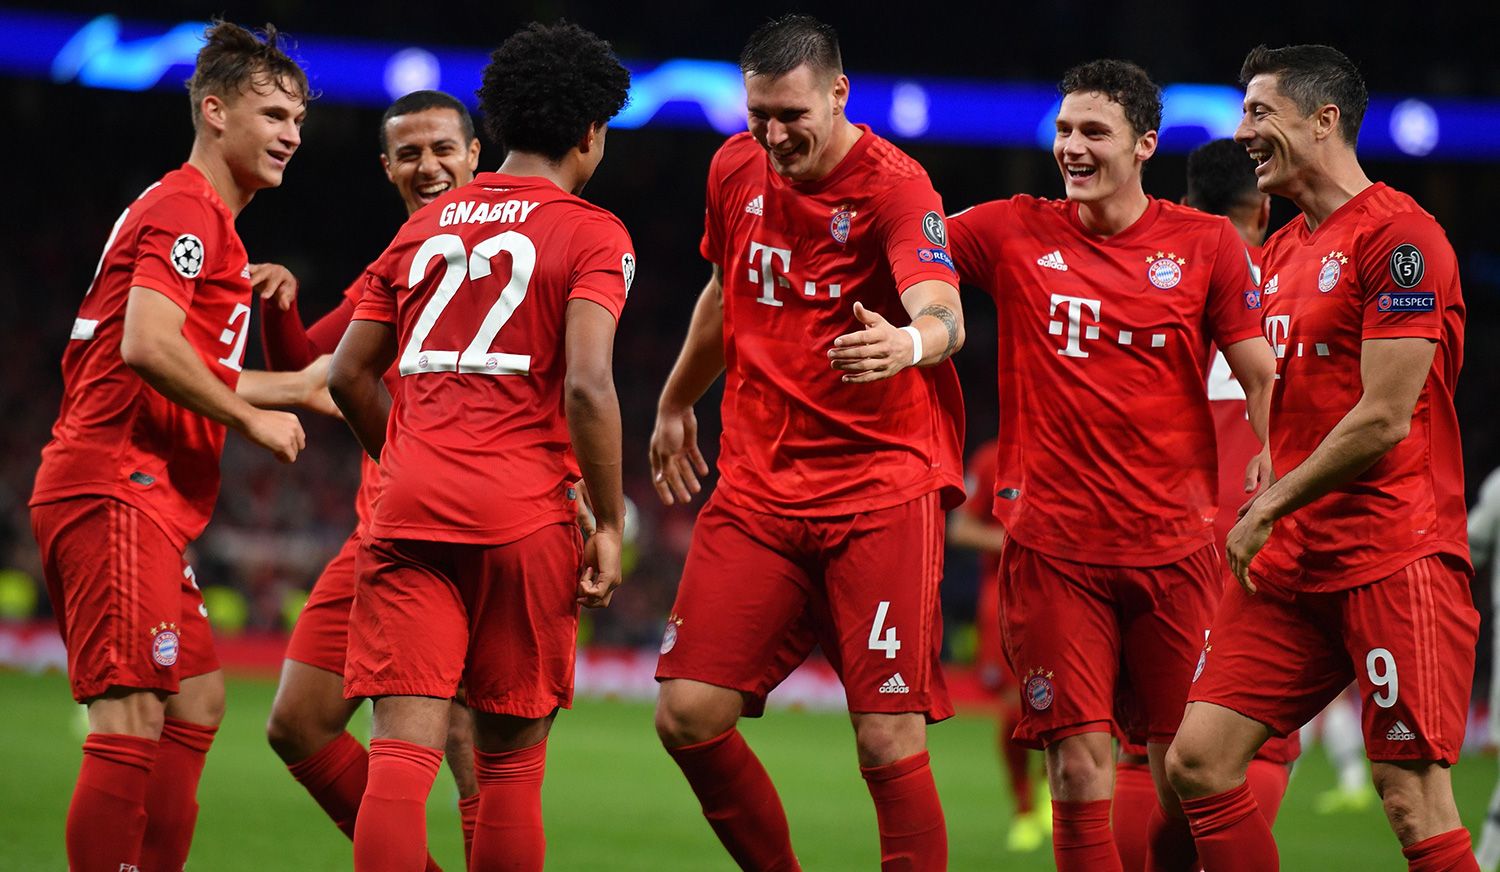 The players of the Bayern celebrate one of the goals of Gnabry